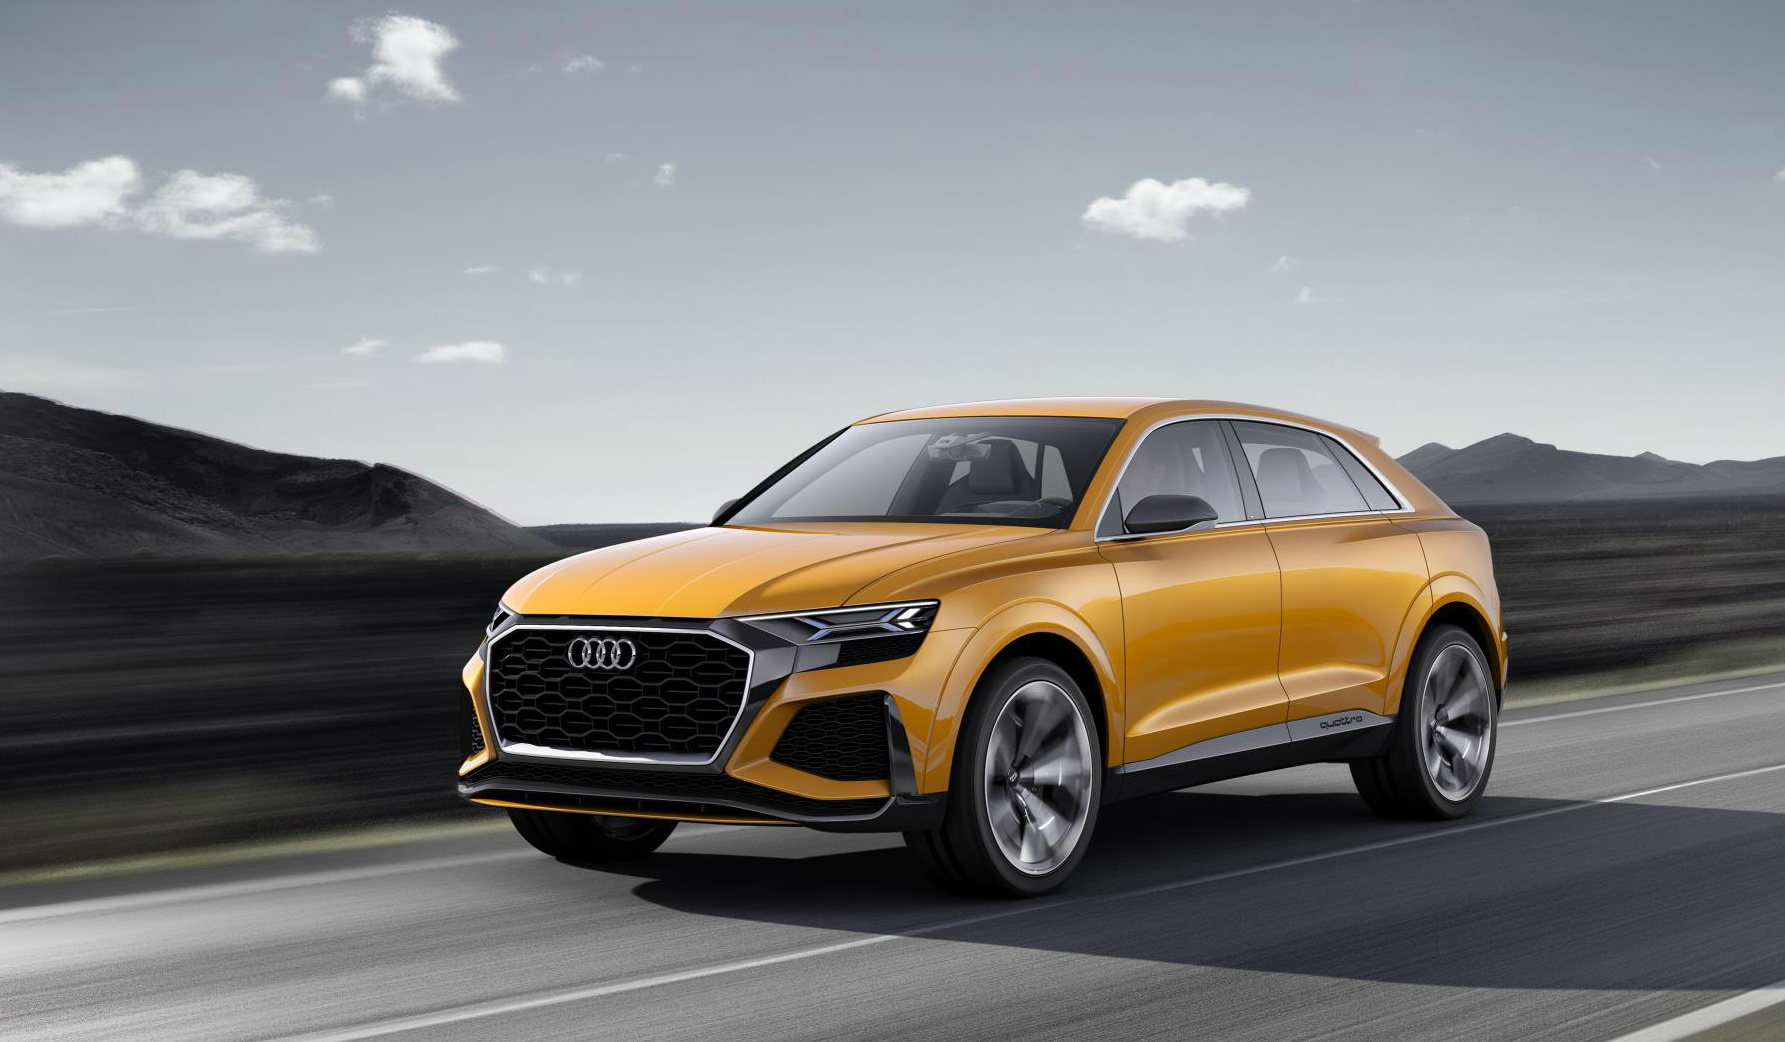 Audi is bringing exciting new PHEVs such as the Q8 to market